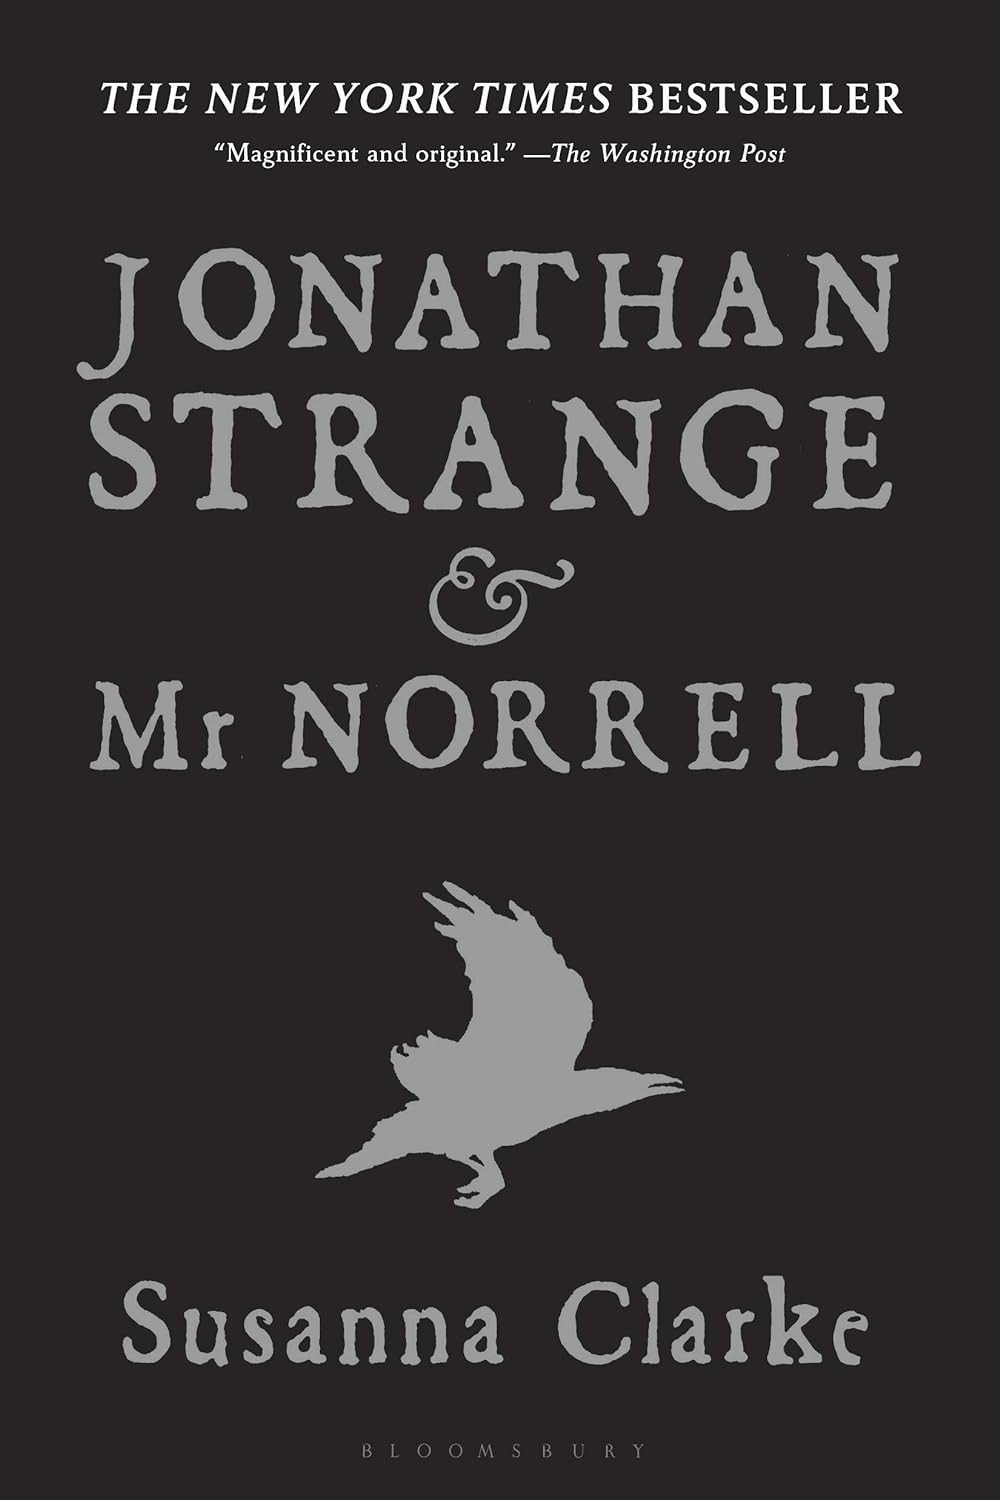 Jonathan Strange and Mr. Norrell, by Susanna Clarke